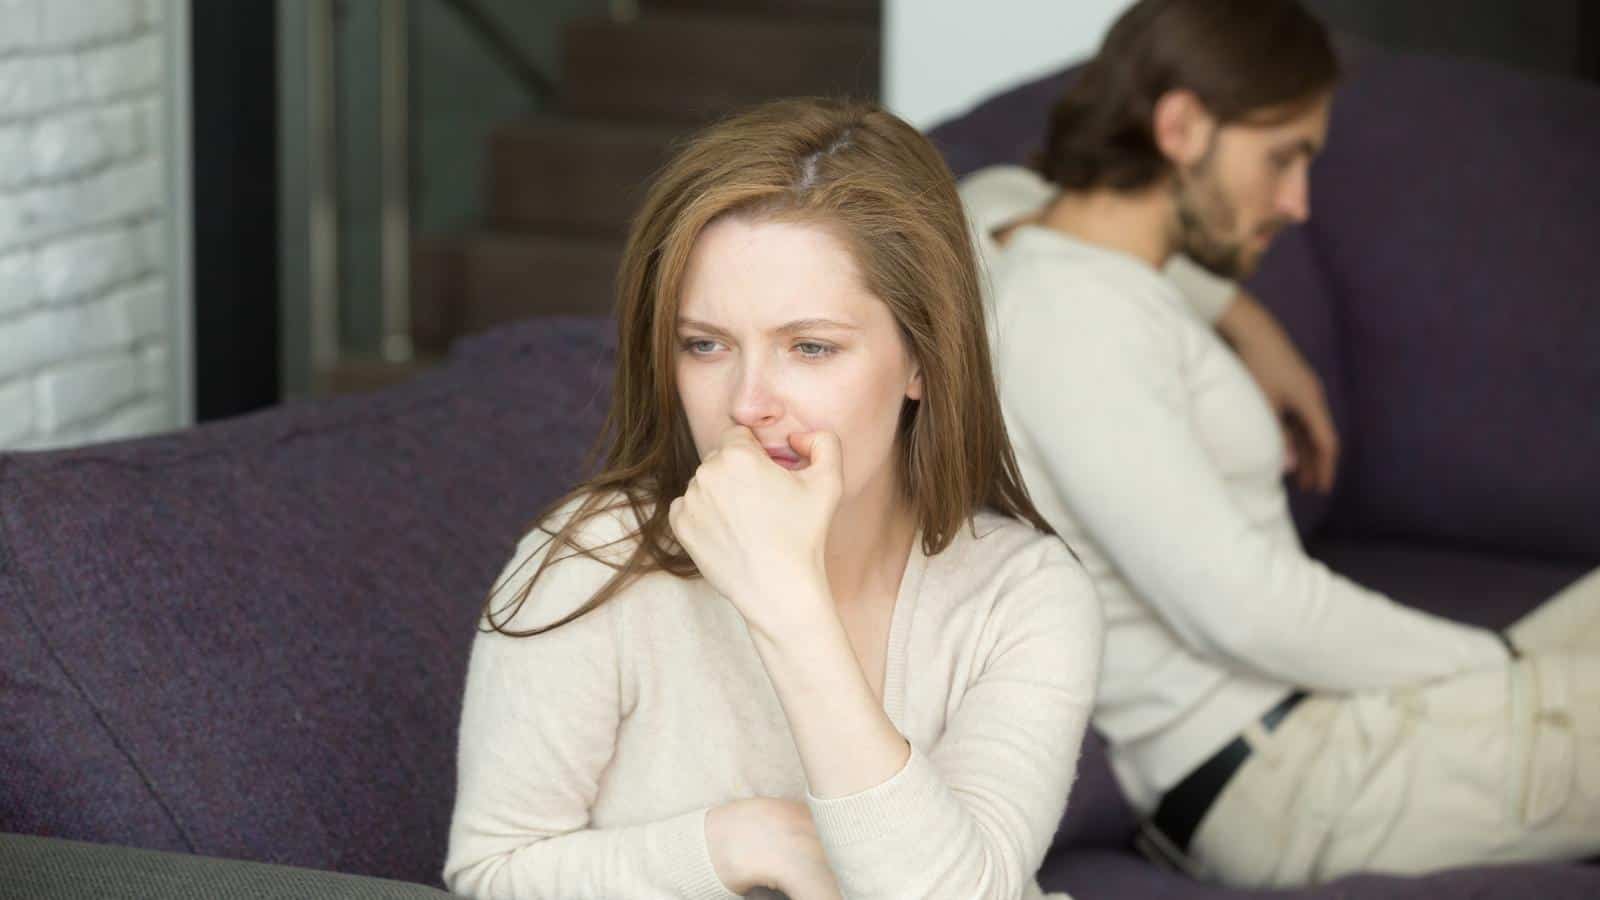 <p>Similarly, emotional turmoil can manifest as meanness. According to <a href="https://www.healthline.com/health/mental-health/emotional-distress#causes">Healthline</a>, emotional distress can affect people’s moods and cause unusual irritability or aggression, which can in turn yield relationship conflicts. Mental health can have a big impact on behavior and actions, which may be the cause of someone’s meanness.</p>